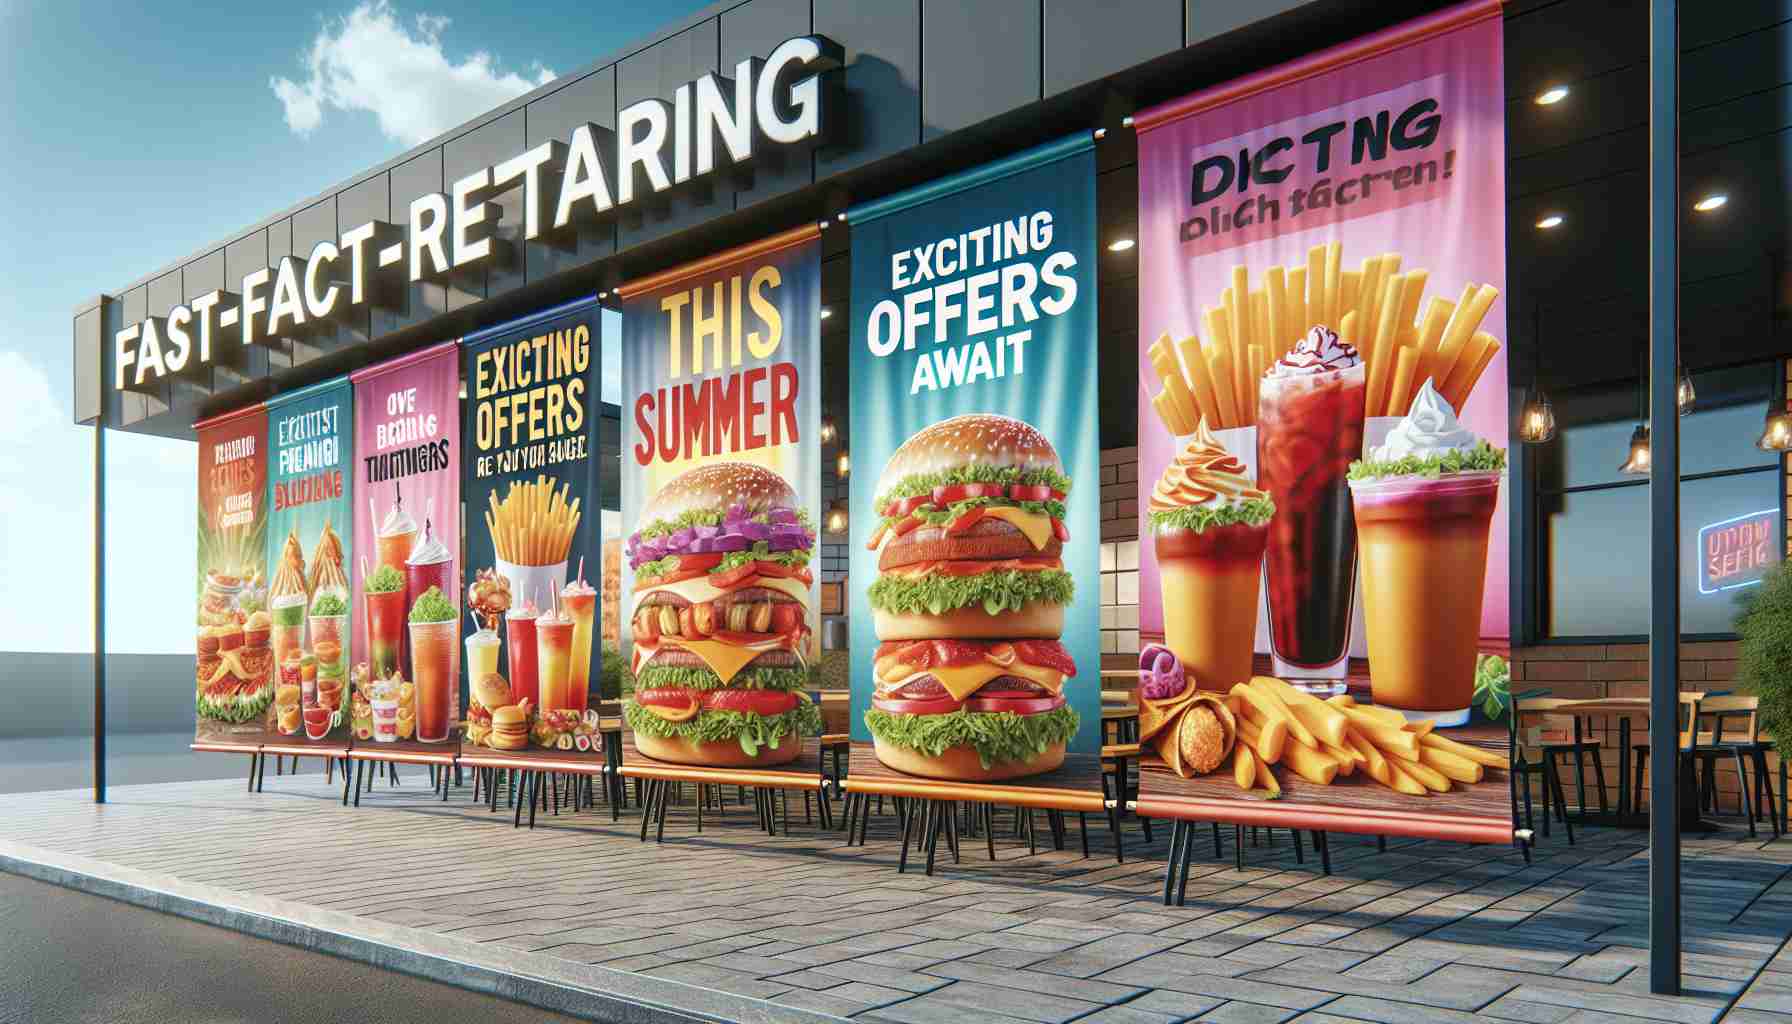 Create a high-definition, realistic image of a fast-food restaurant in the summertime, with banners and signs promoting exciting offers and deals. The banners are filled with vibrant colors and tantalizing images of food and drinks, with words such as 'Exciting Offers Await' and 'This Summer' prominently displayed.